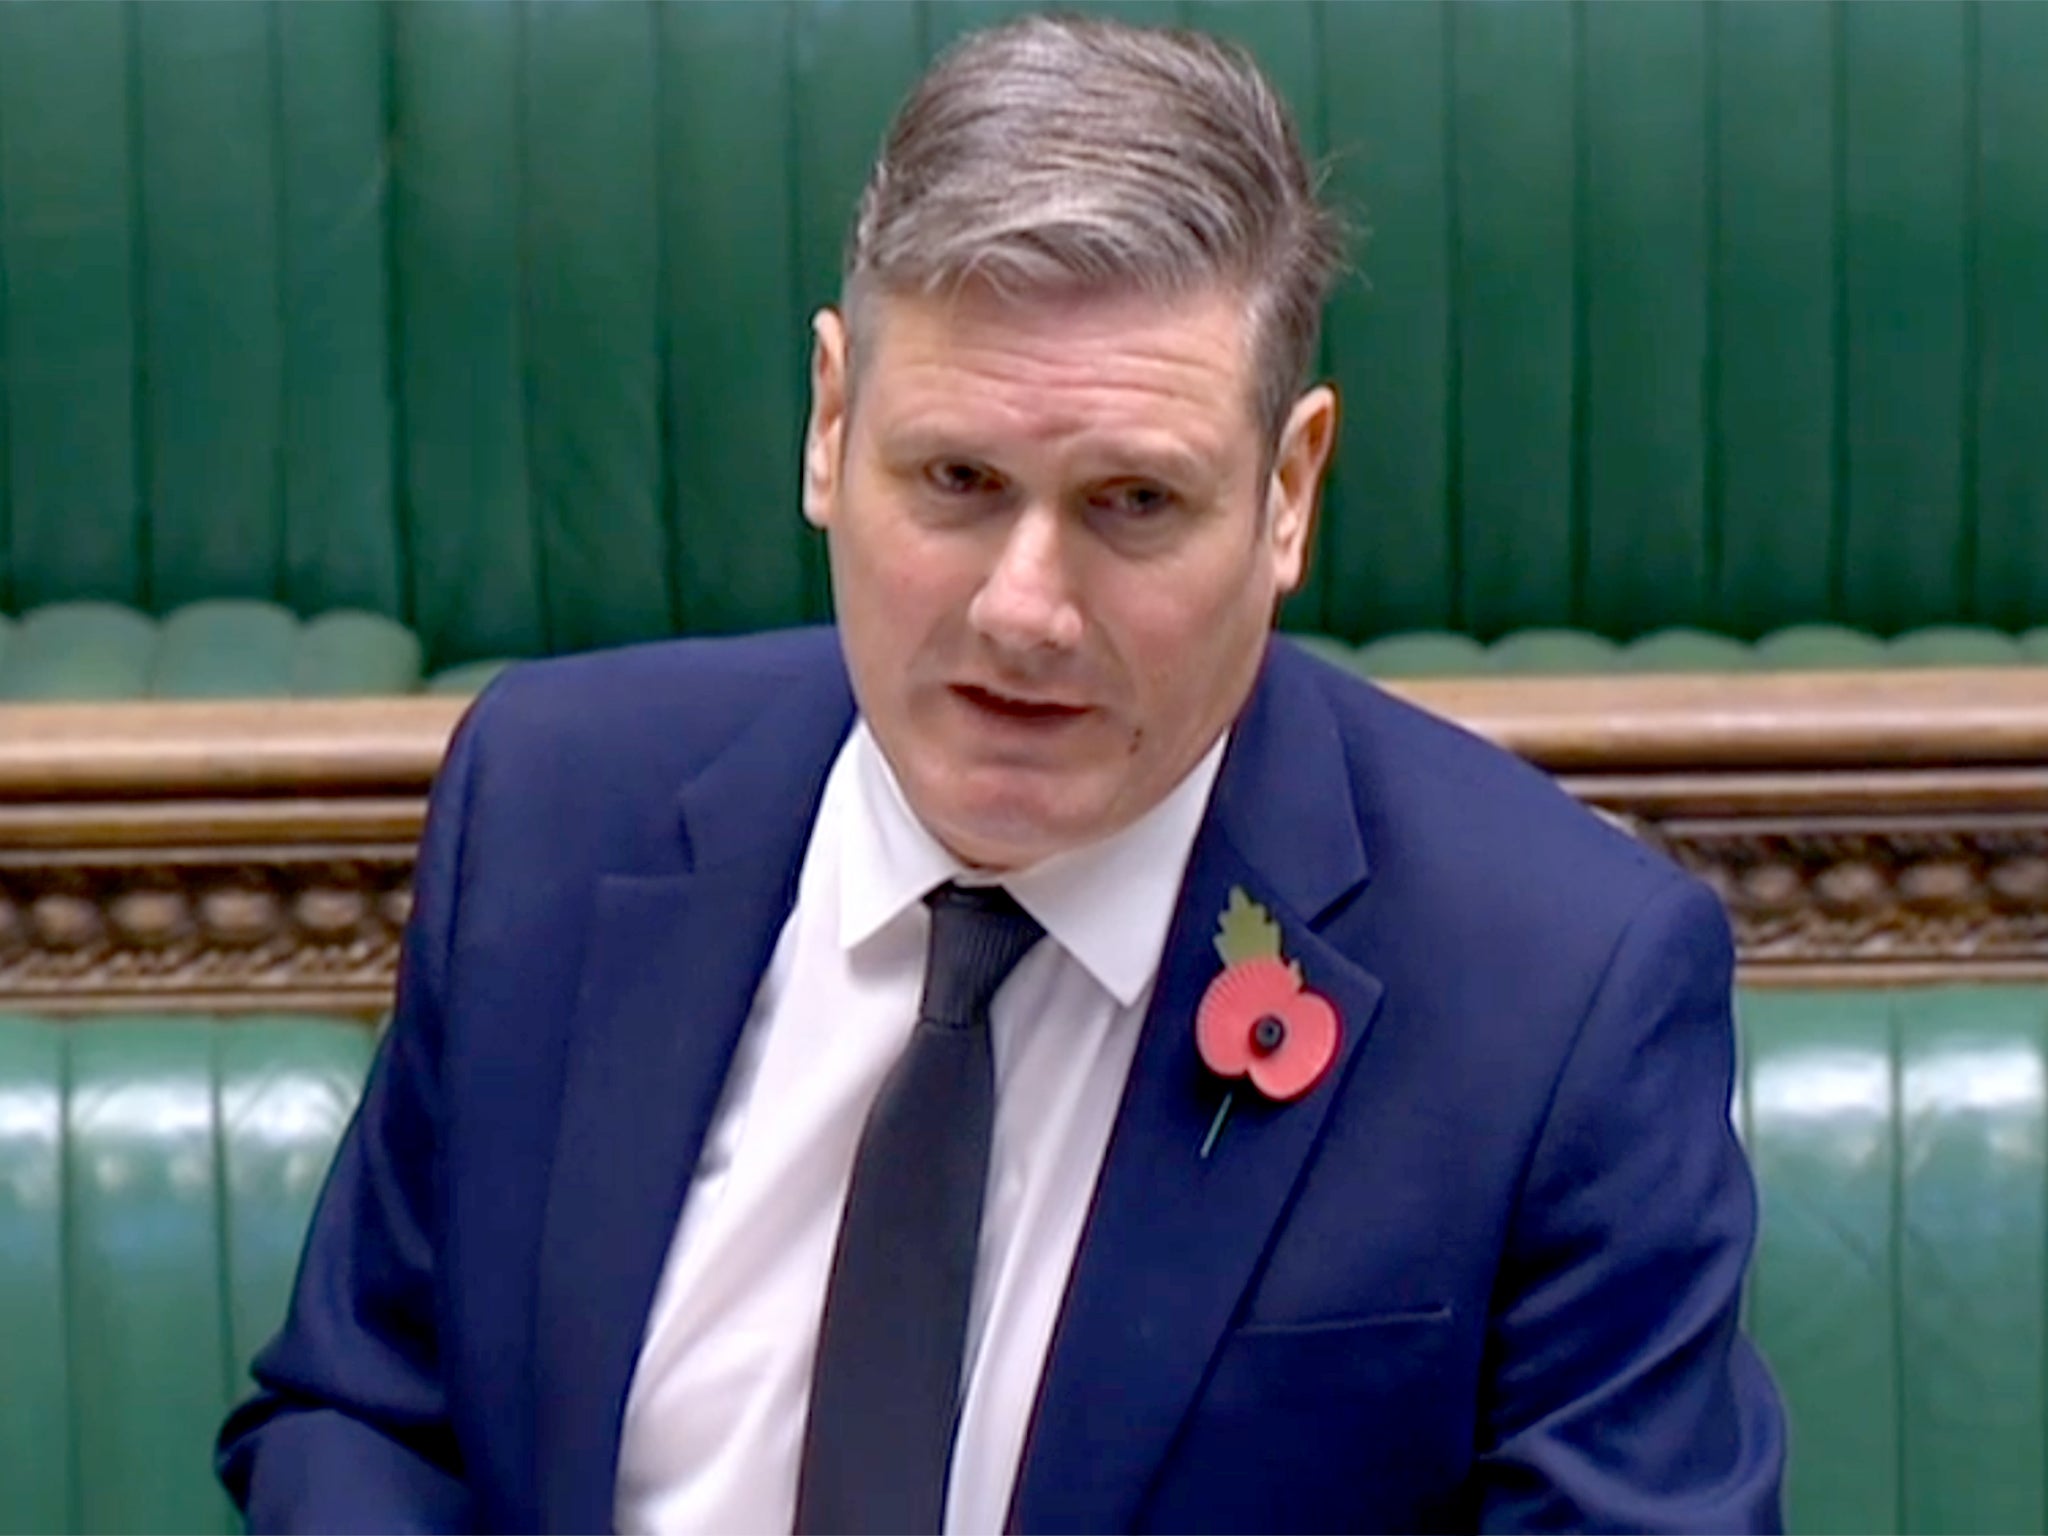 Starmer in the Commons on Wednesday